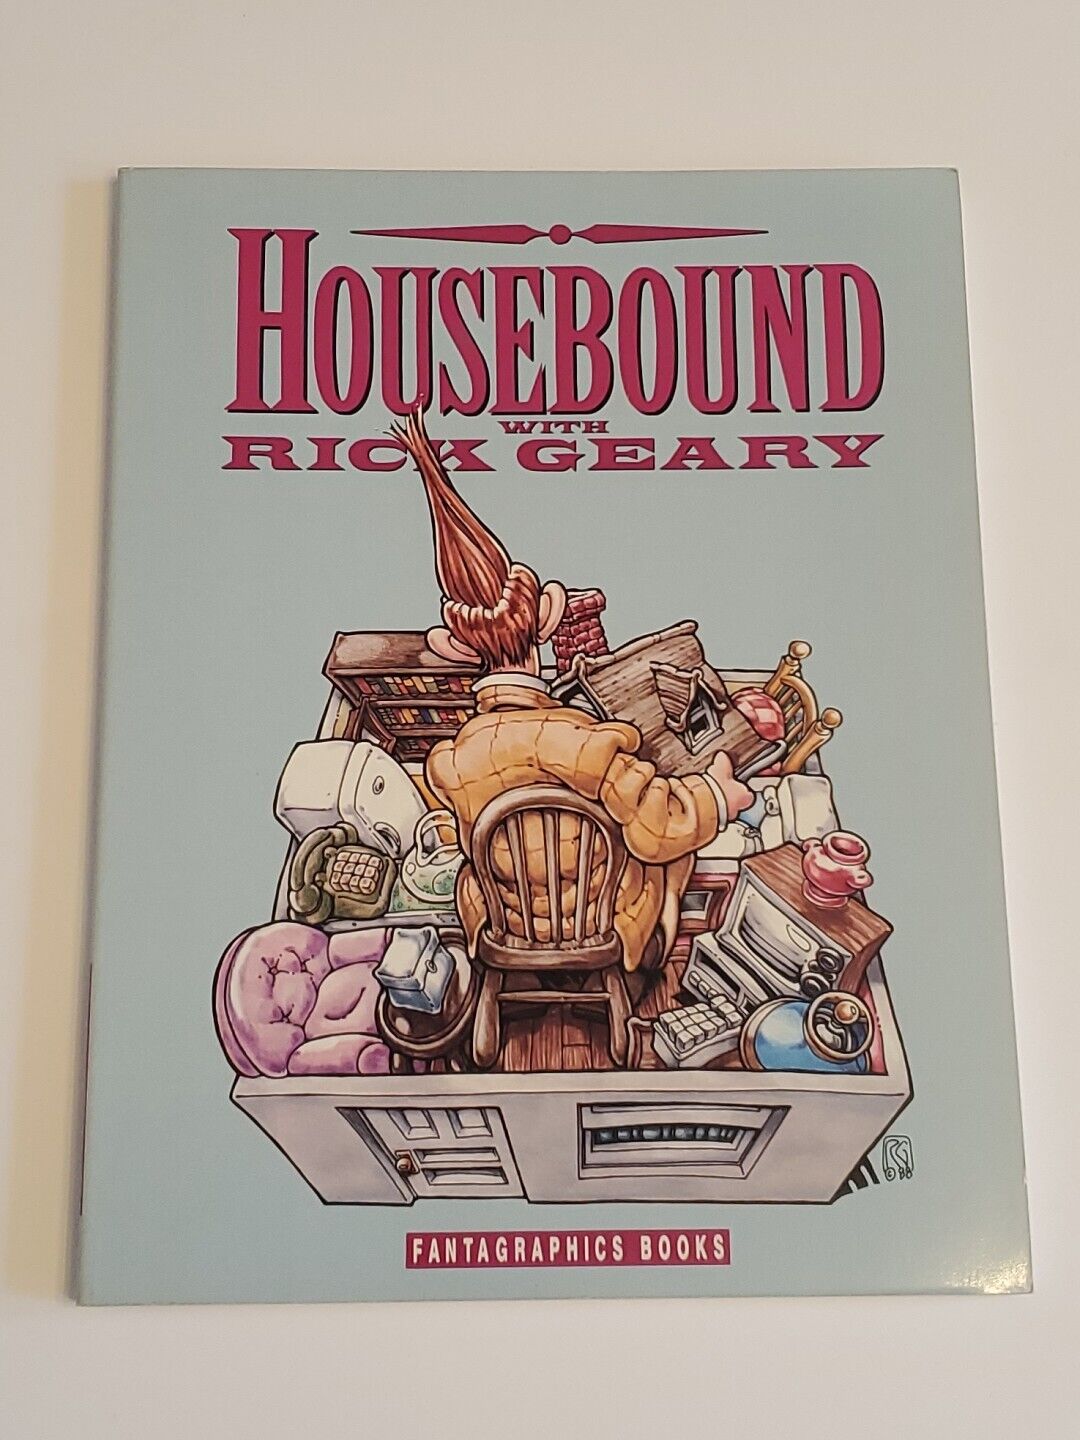 1991 HOUSEBOUND Graphic Novel By Rick Geary, Fantagraphics Books, Softcover